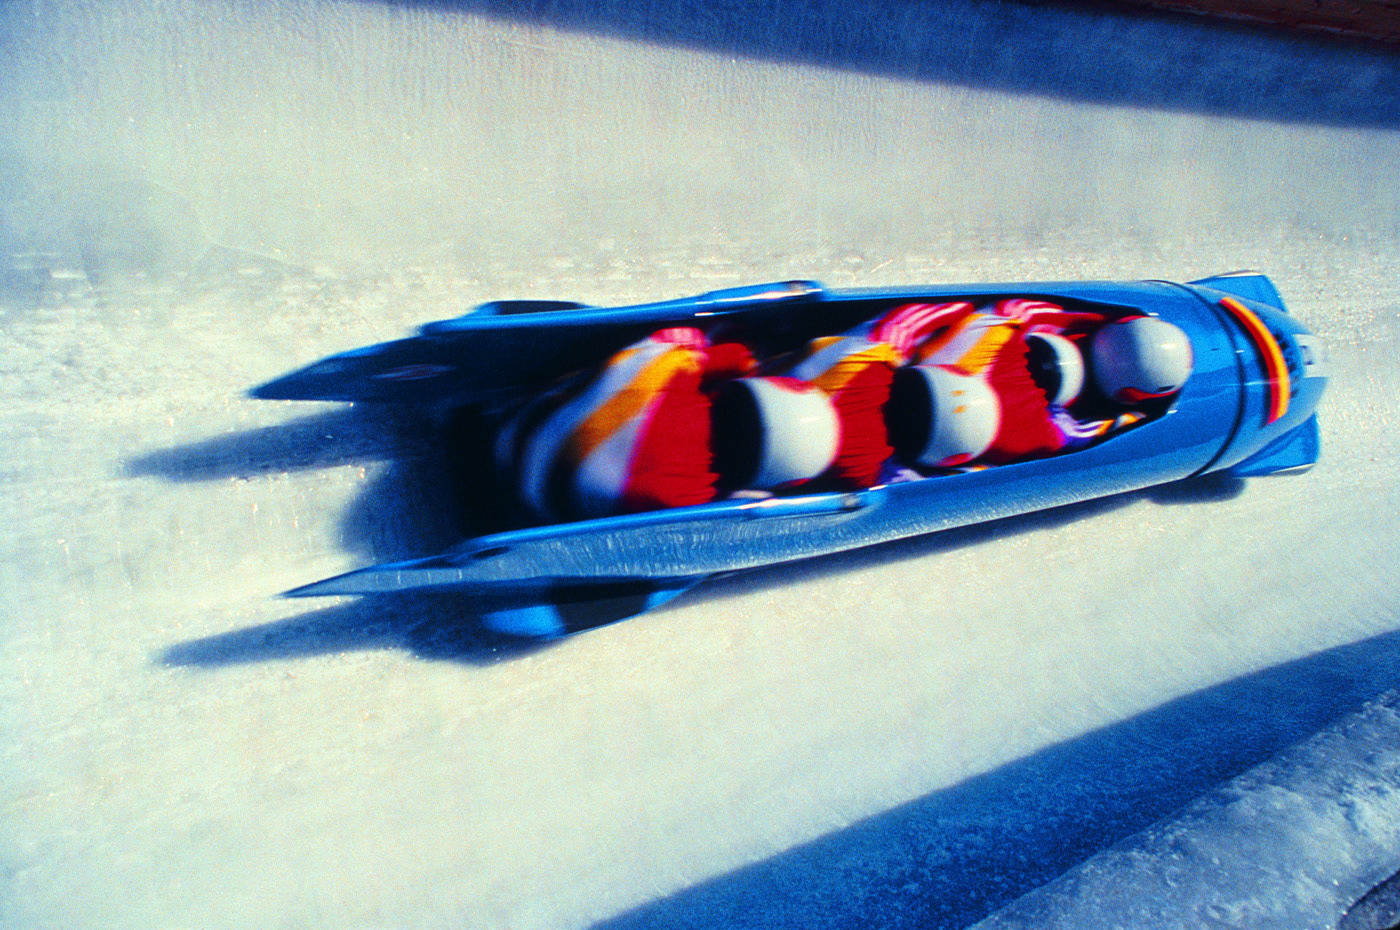 Stockbyte image of bobsled racing.